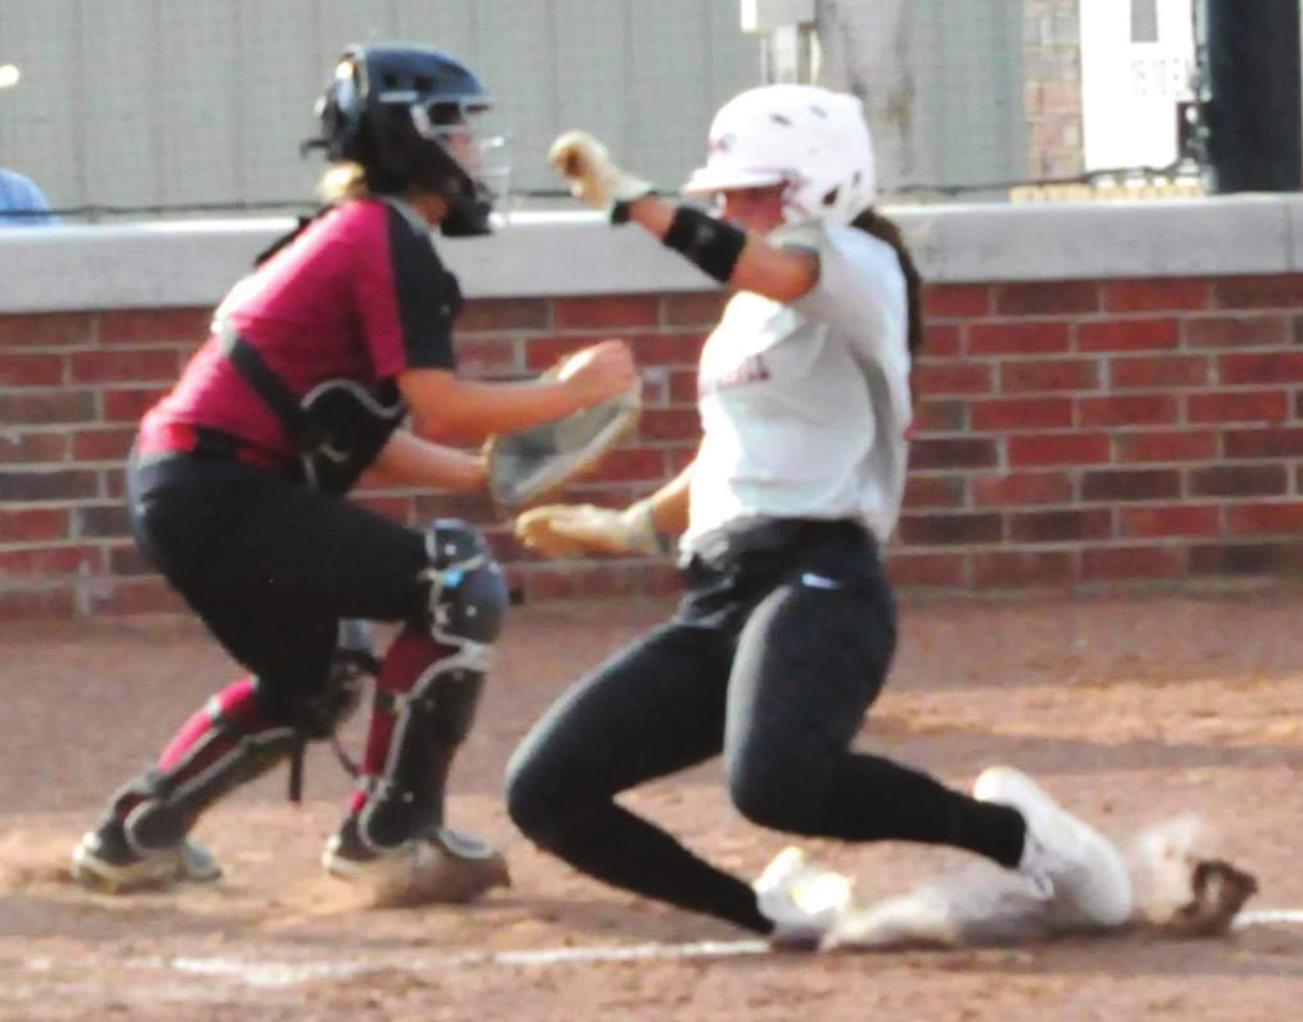 Catcher Vanessa Davis outs a Tuttle player during the September 1 game. photo provided by Lisa Pebley